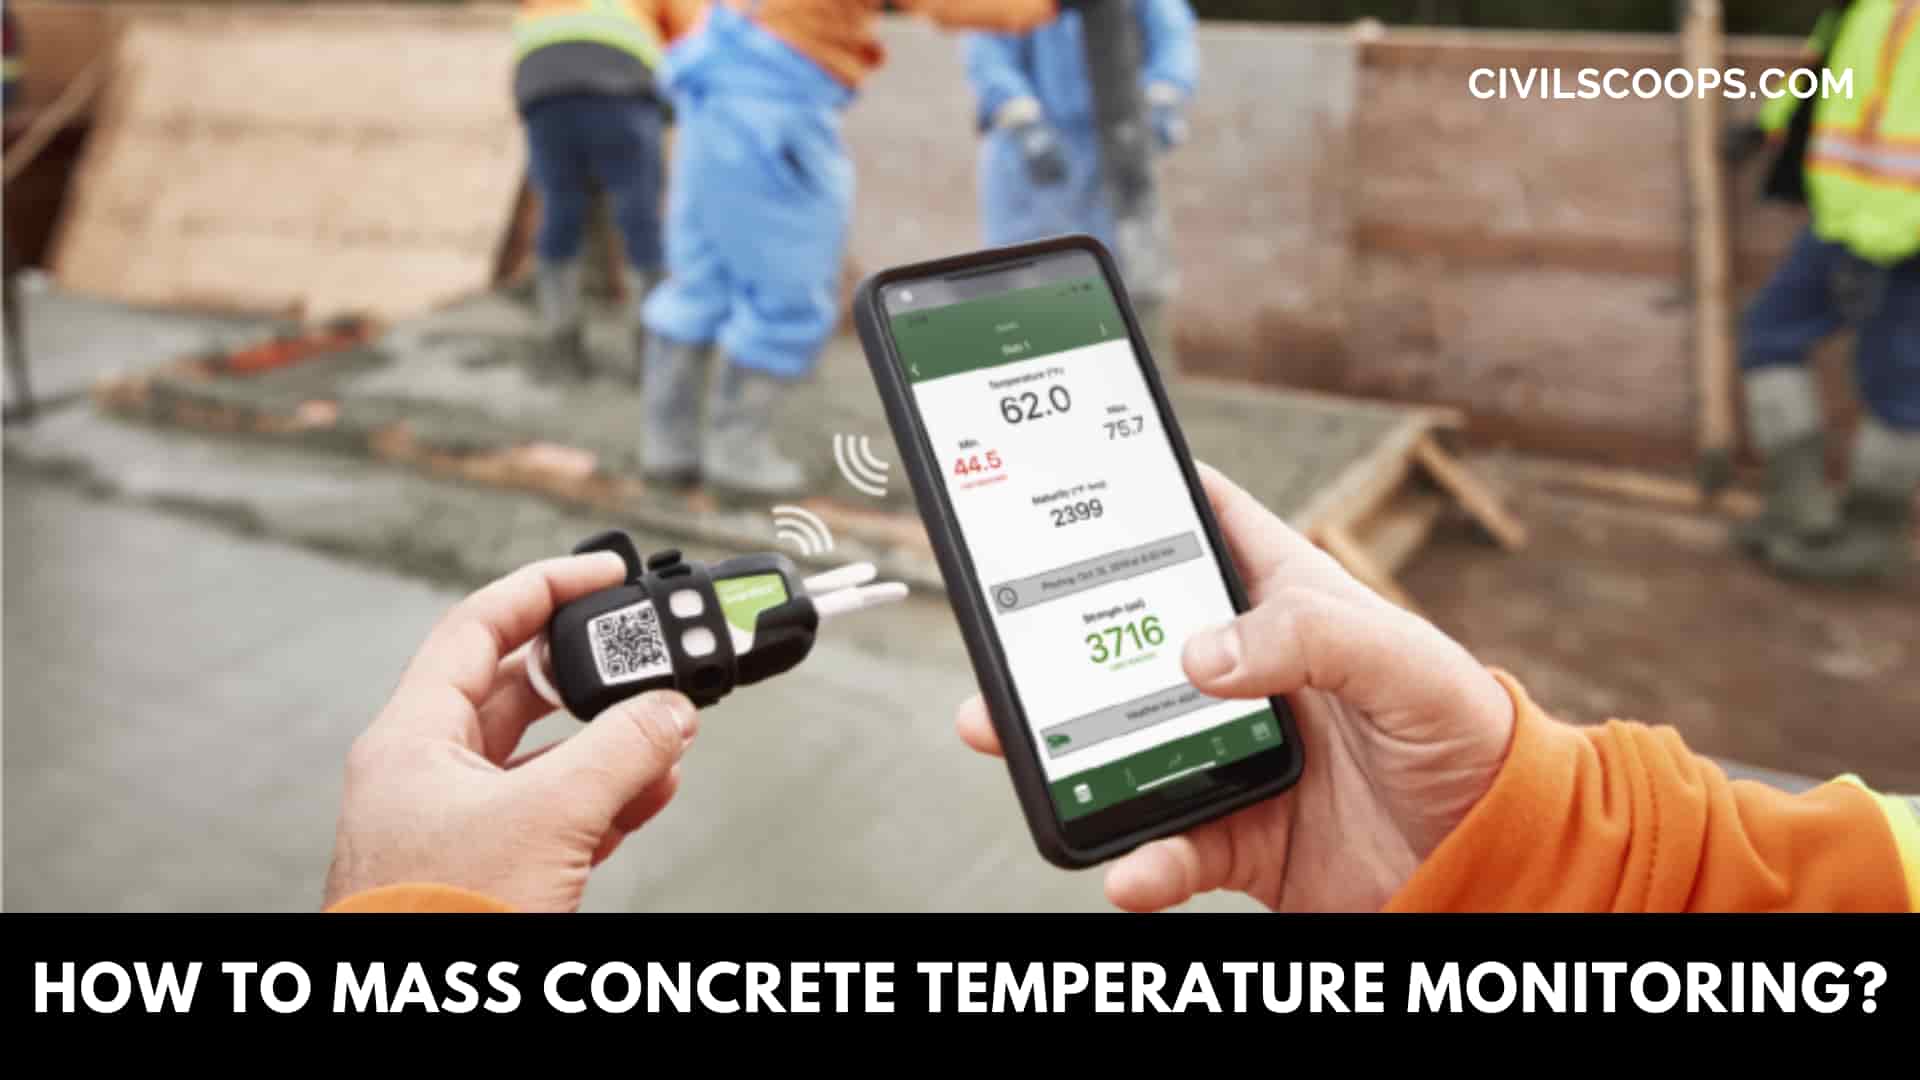 How to Mass Concrete Temperature Monitoring?